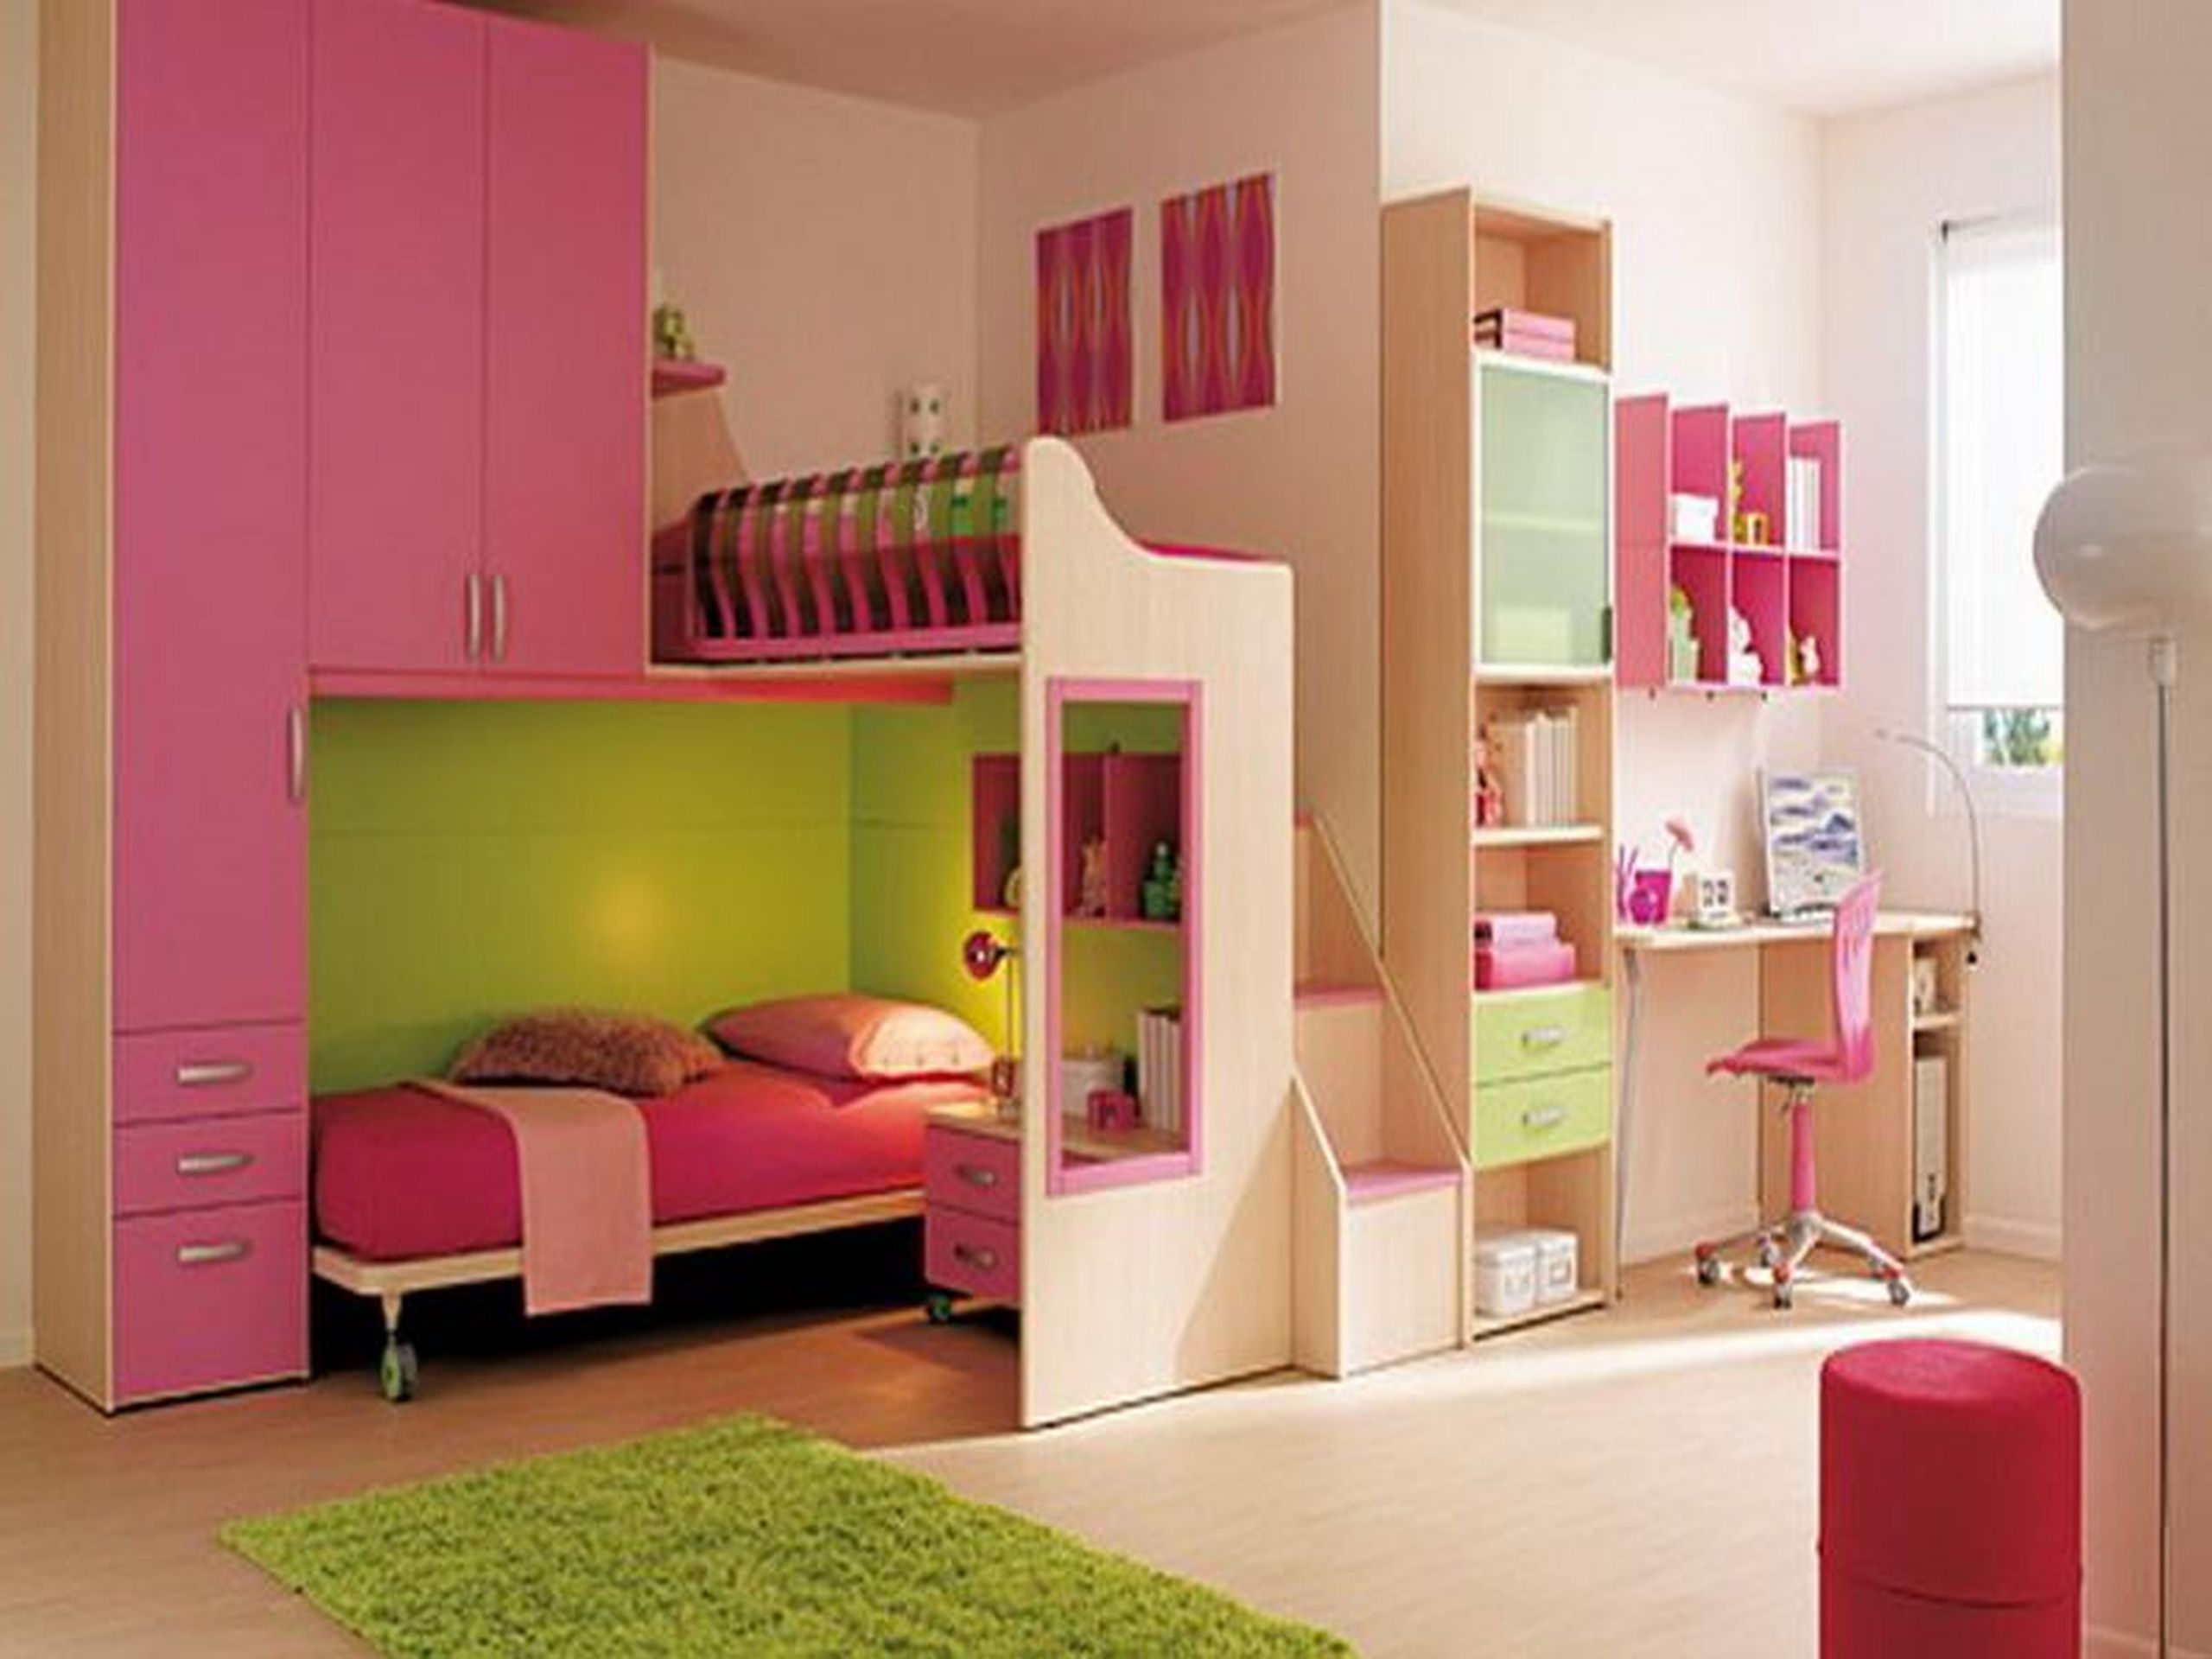 Diy Kids Rooms
 DIY Storage Ideas For Kids Room Crafts To Do With Kids